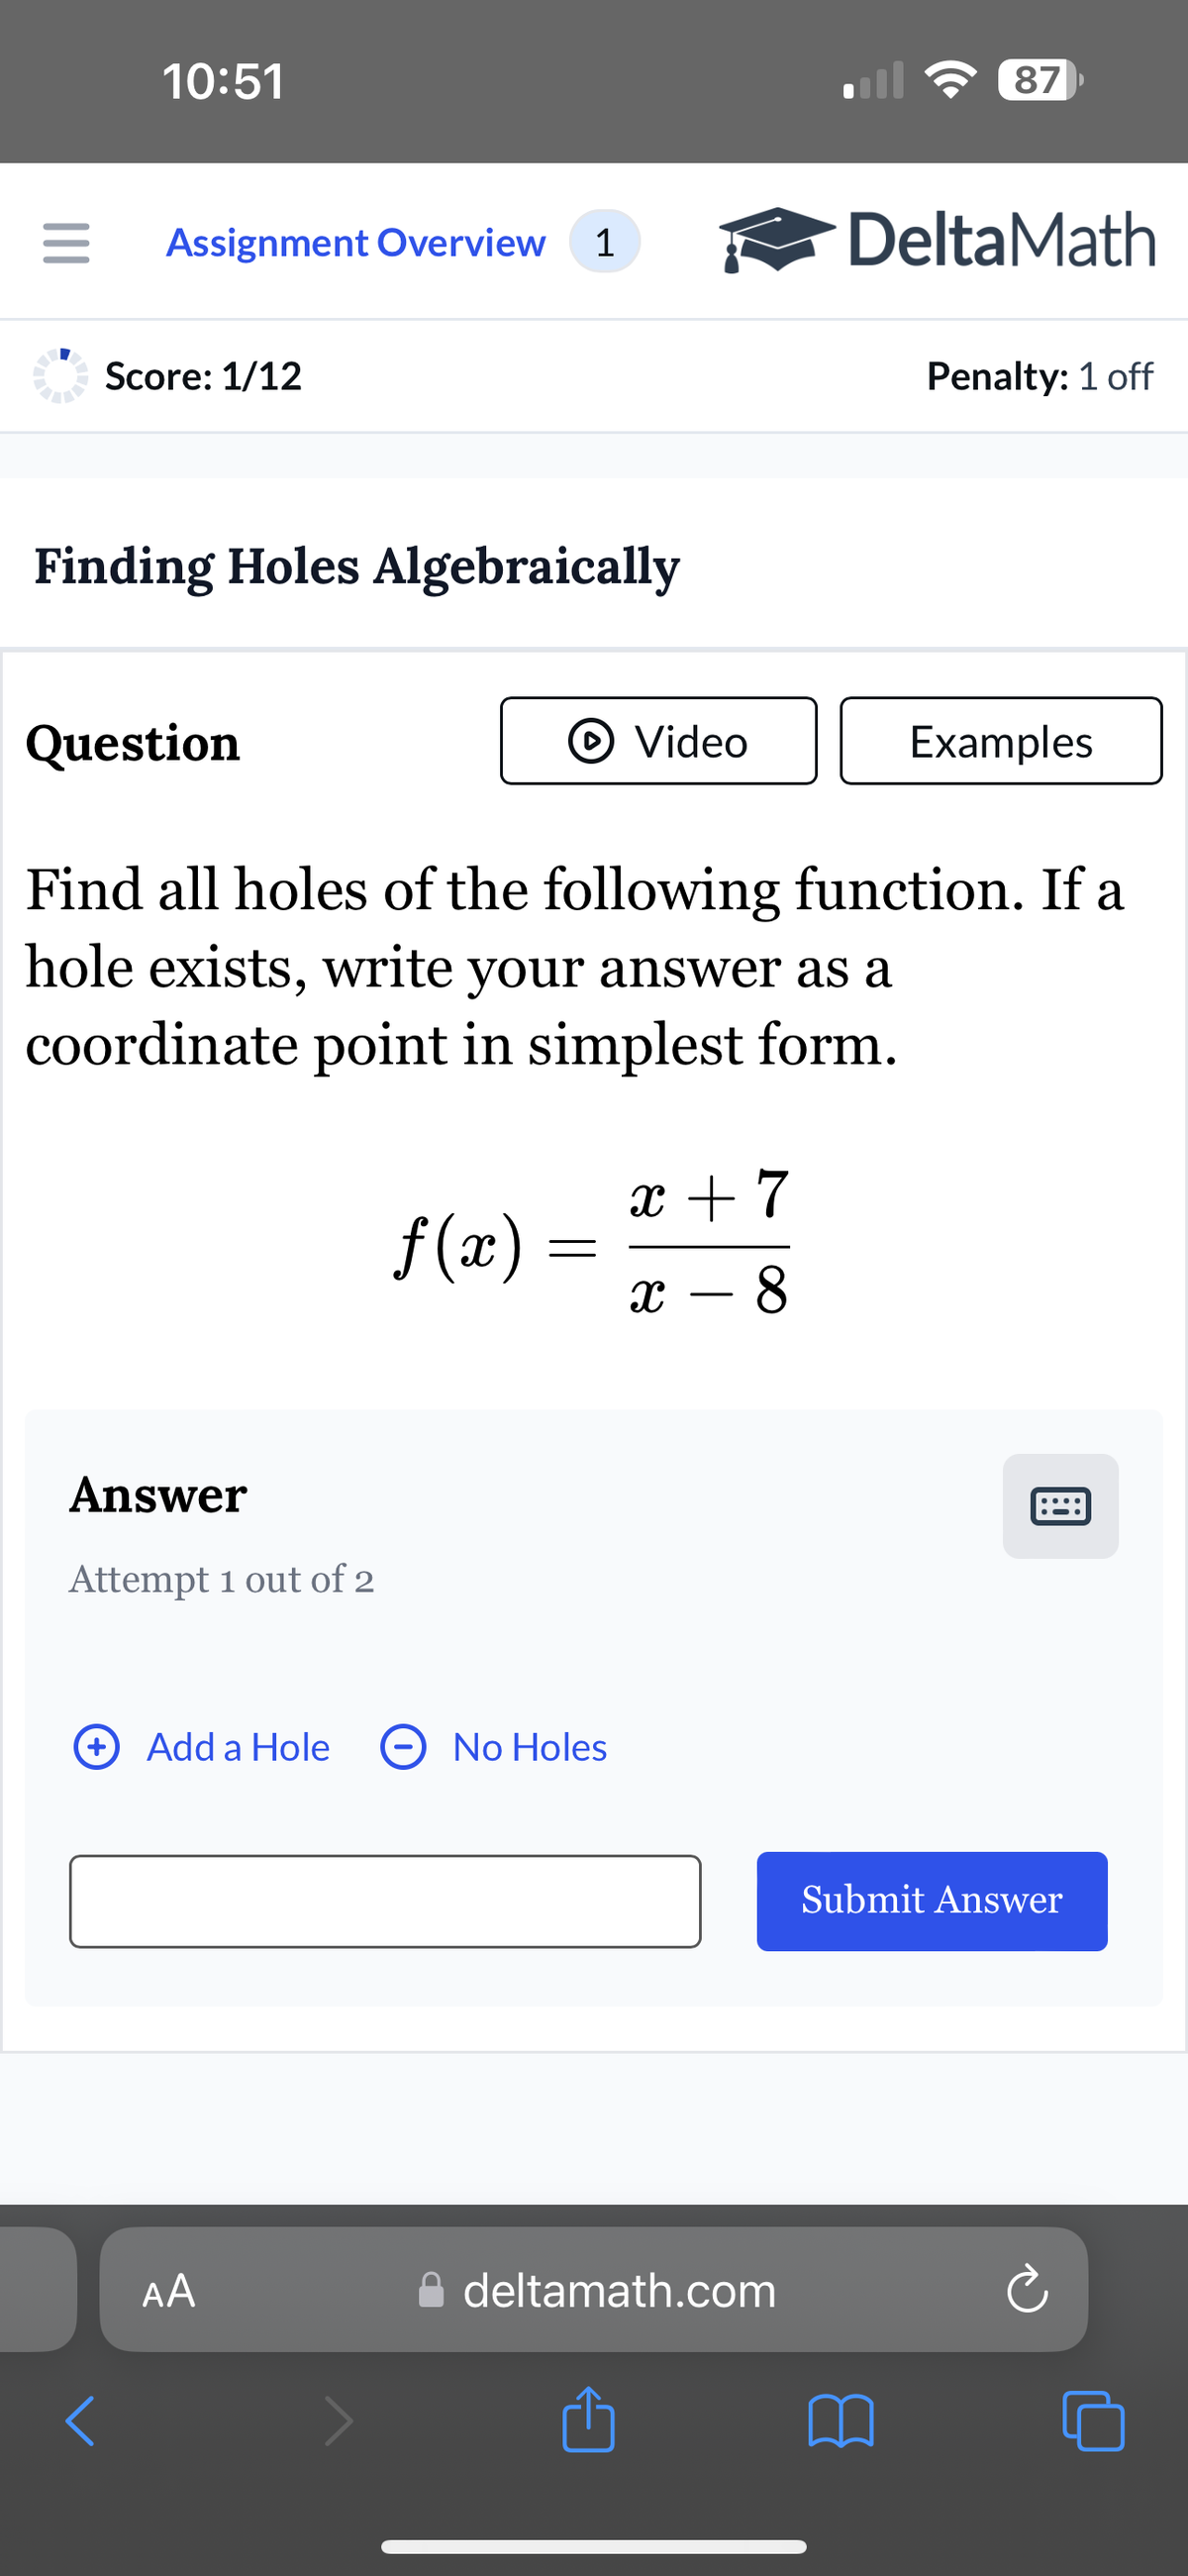 10:51
87
Assignment Overview 1
DeltaMath
Score: 1/12
Penalty: 1 off
Finding Holes Algebraically
Question
Video
Examples
Find all holes of the following function. If a
hole exists, write your answer as a
coordinate point in simplest form.
Answer
Attempt 1 out of 2
x + 7
f(x) =
=
-
x - 8
Add a Hole
No Holes
AA
A deltamath.com
1
Submit Answer